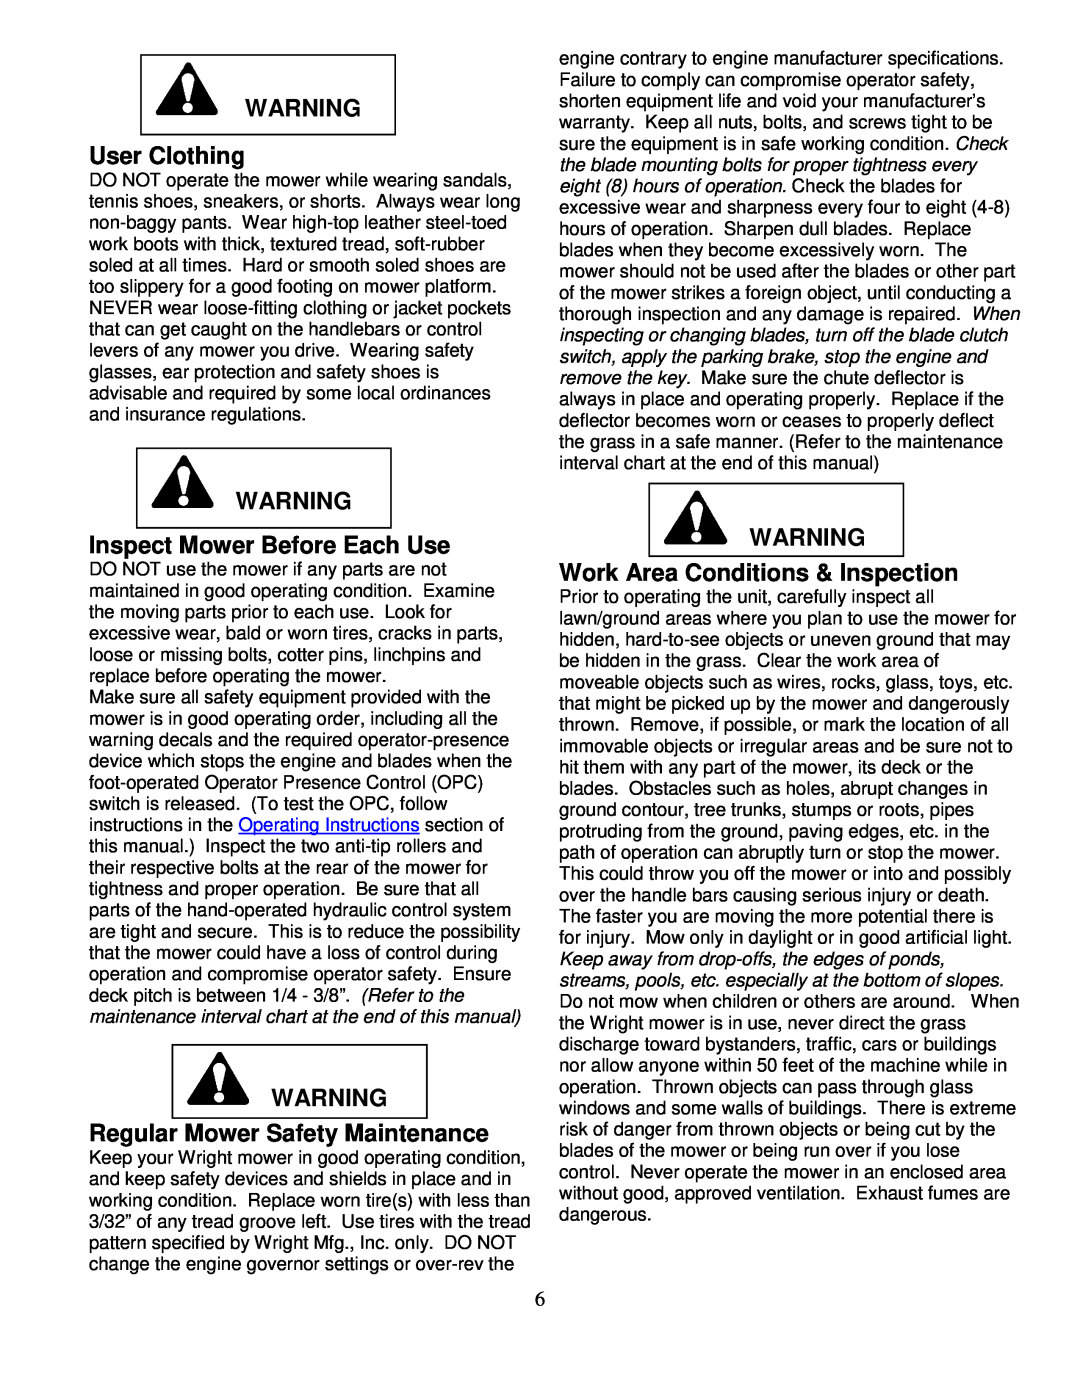 Wright Manufacturing 14SH654 owner manual User Clothing, Inspect Mower Before Each Use, Regular Mower Safety Maintenance 